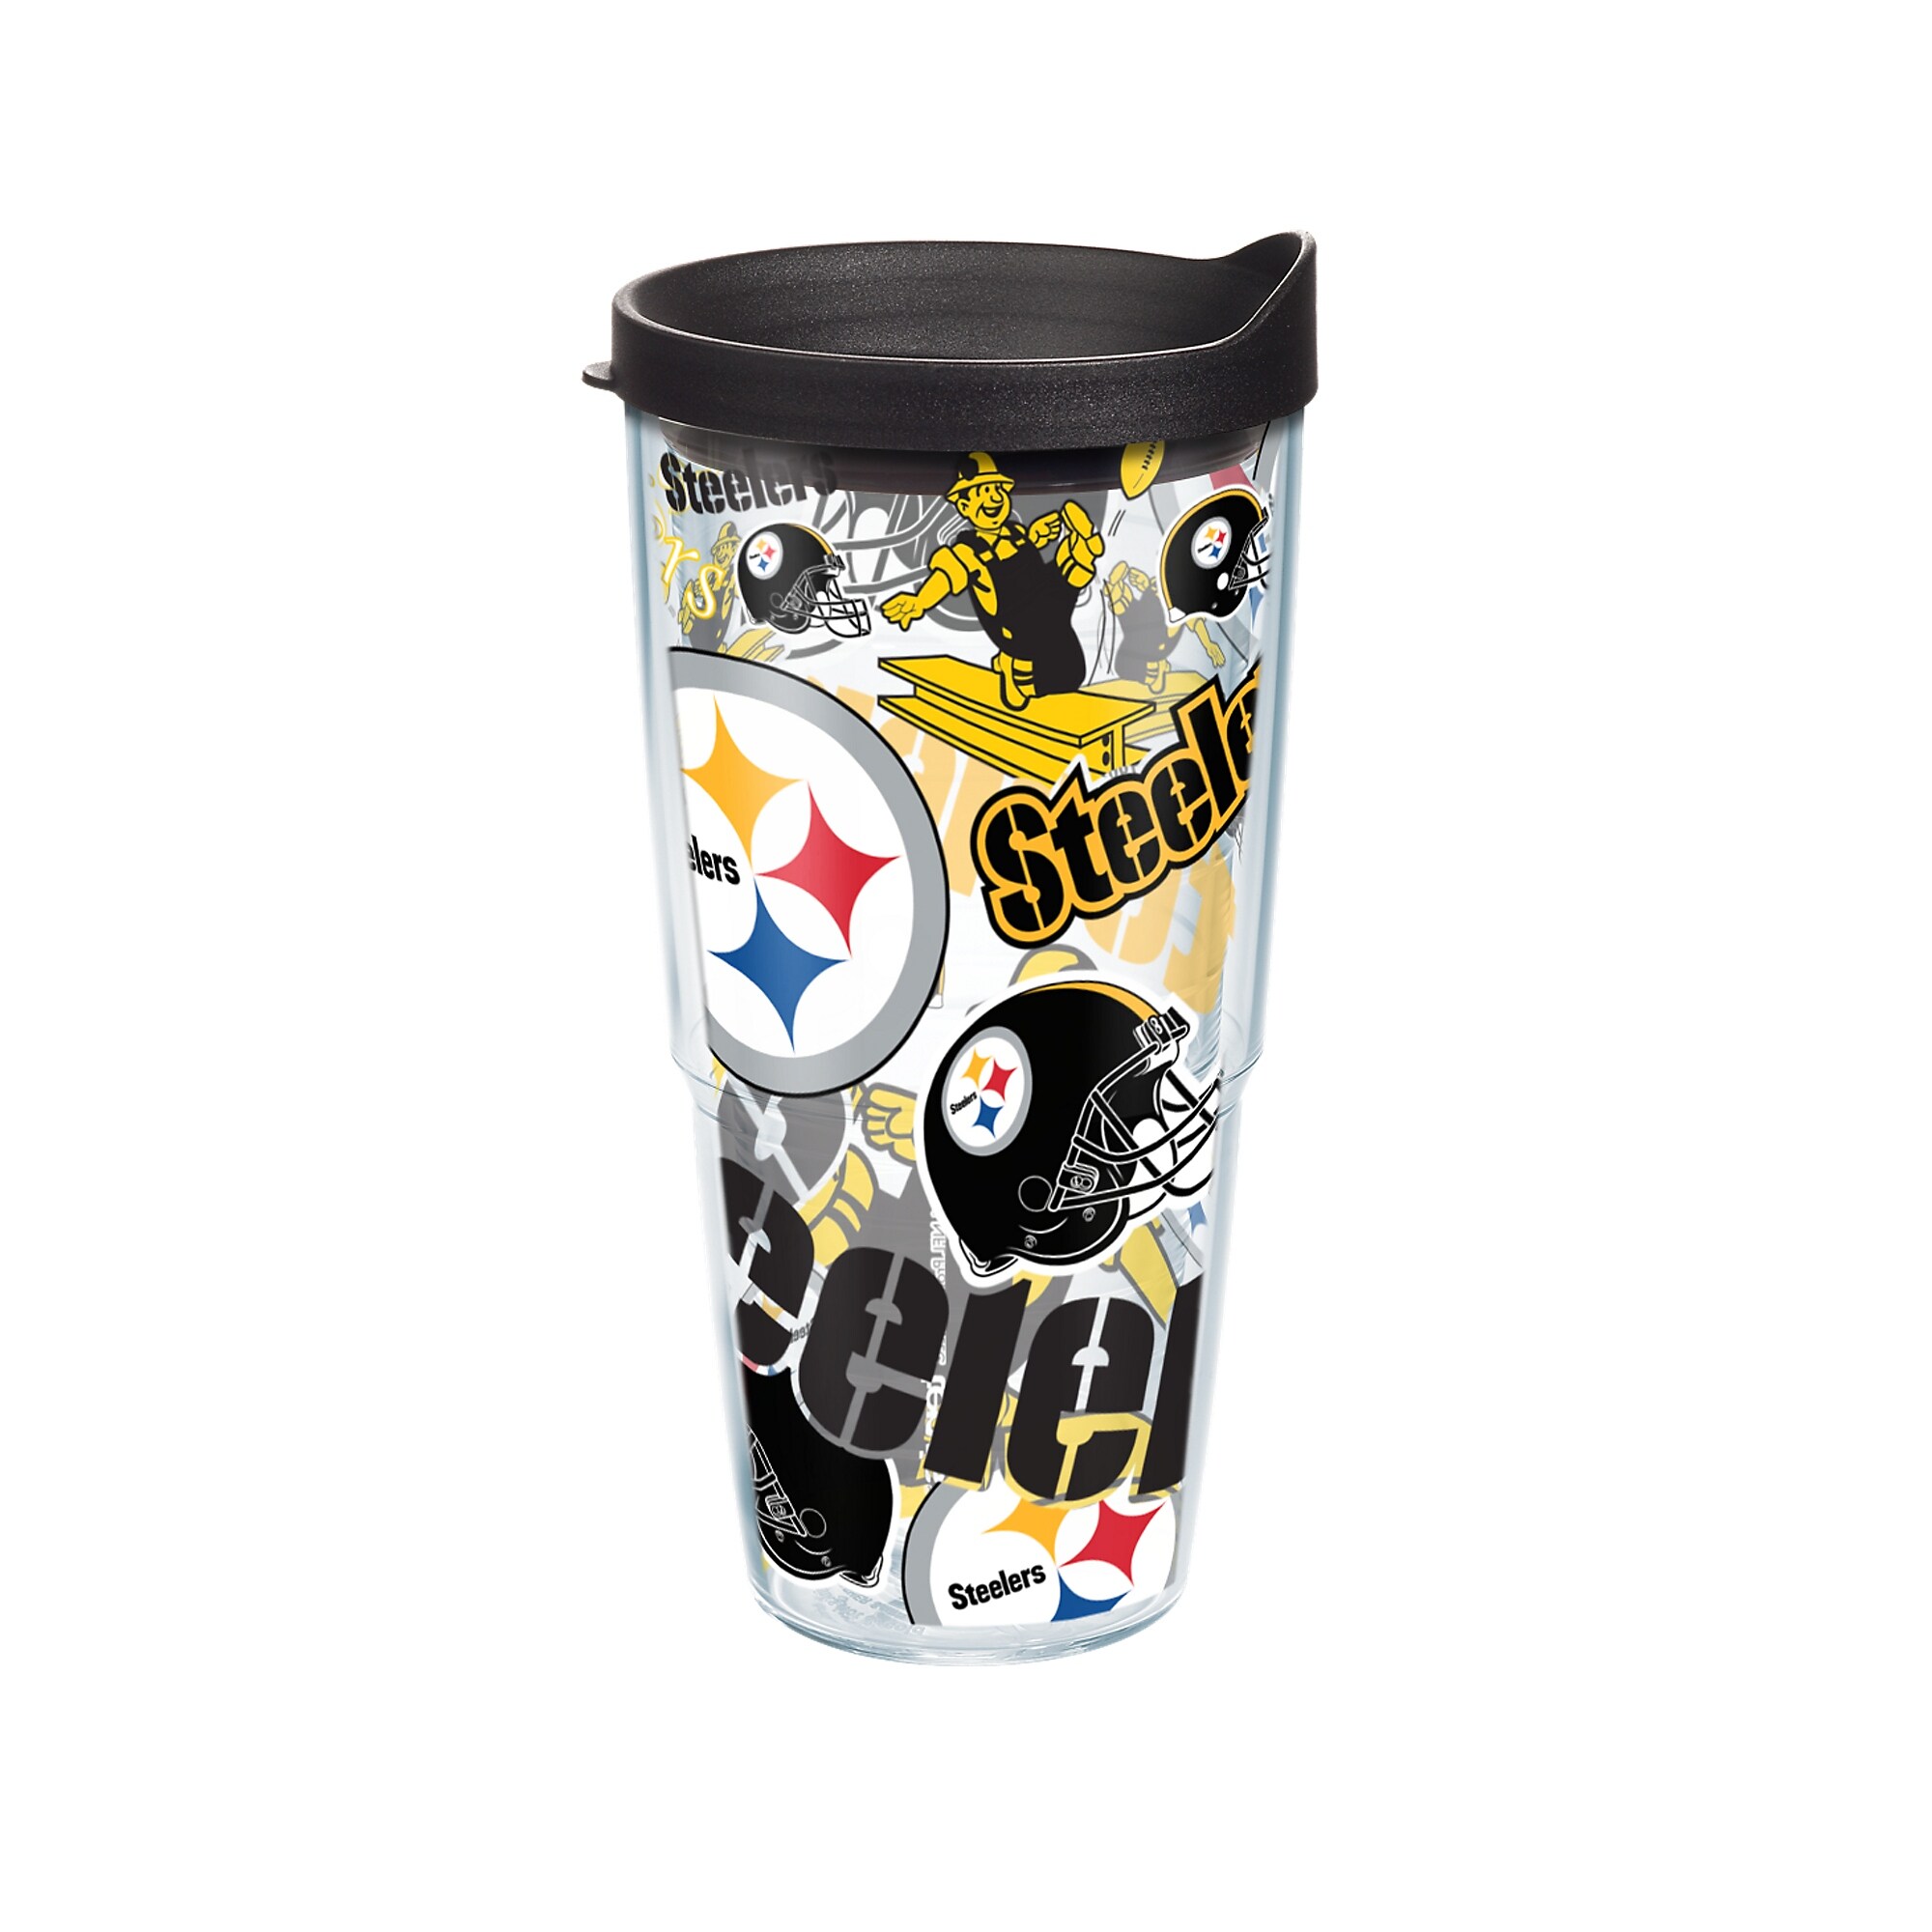 NFL Pittsburgh Steelers 16oz INSULATED TRAVEL CUP Tumbler w/ Lid by TERVIS